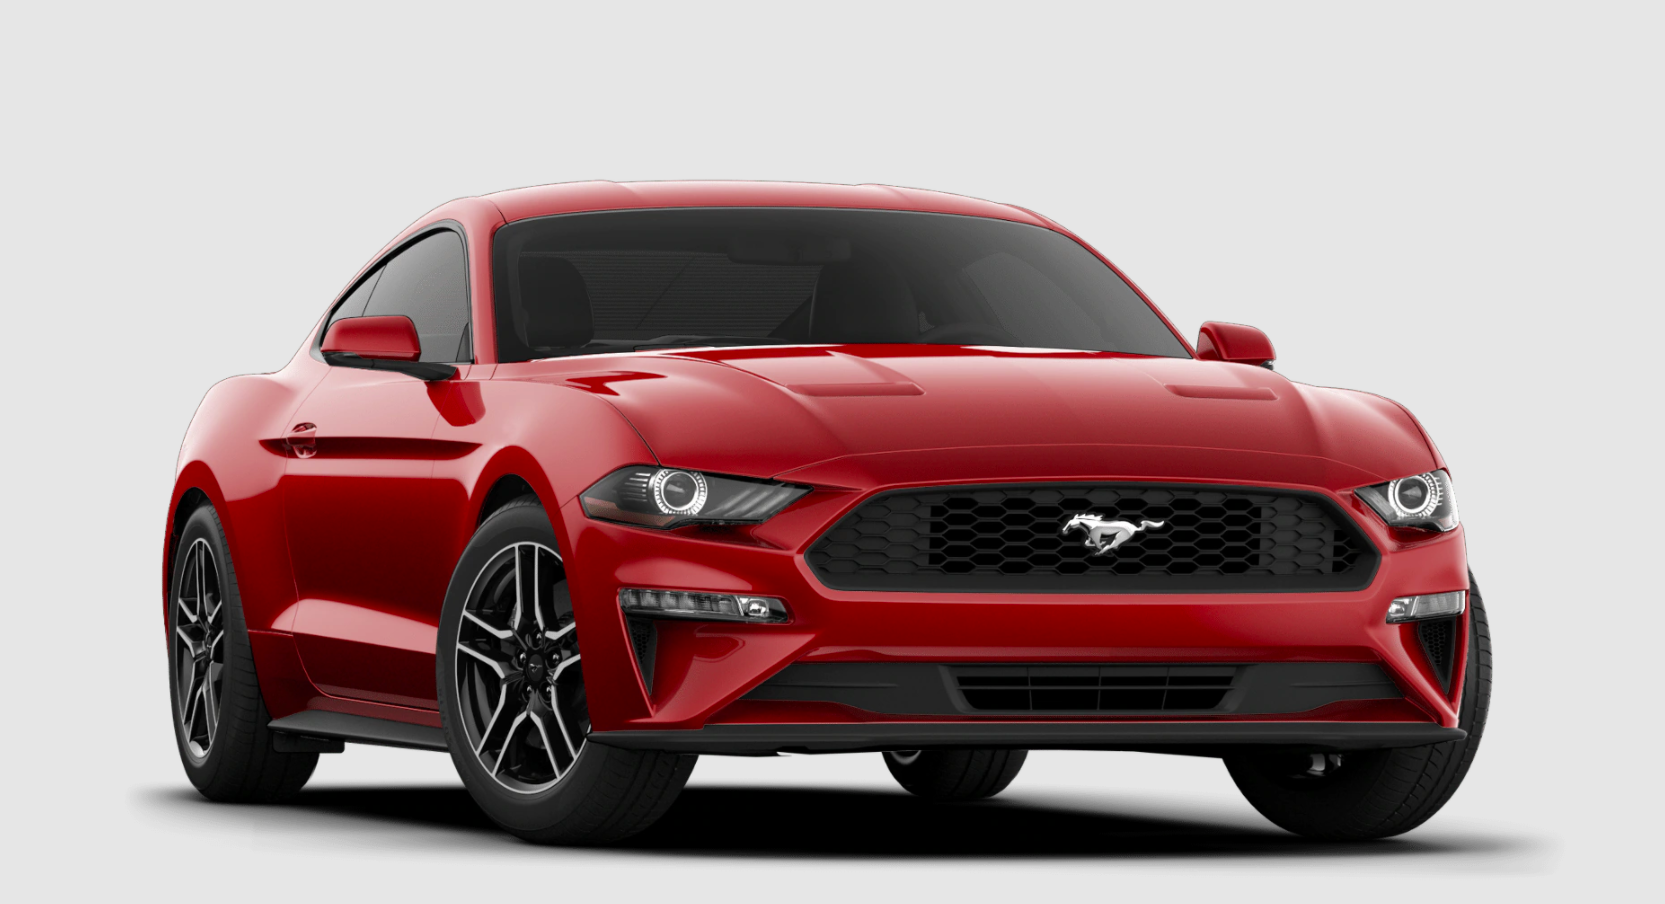 Used Ford Mustang Offers In Thomasville, GA